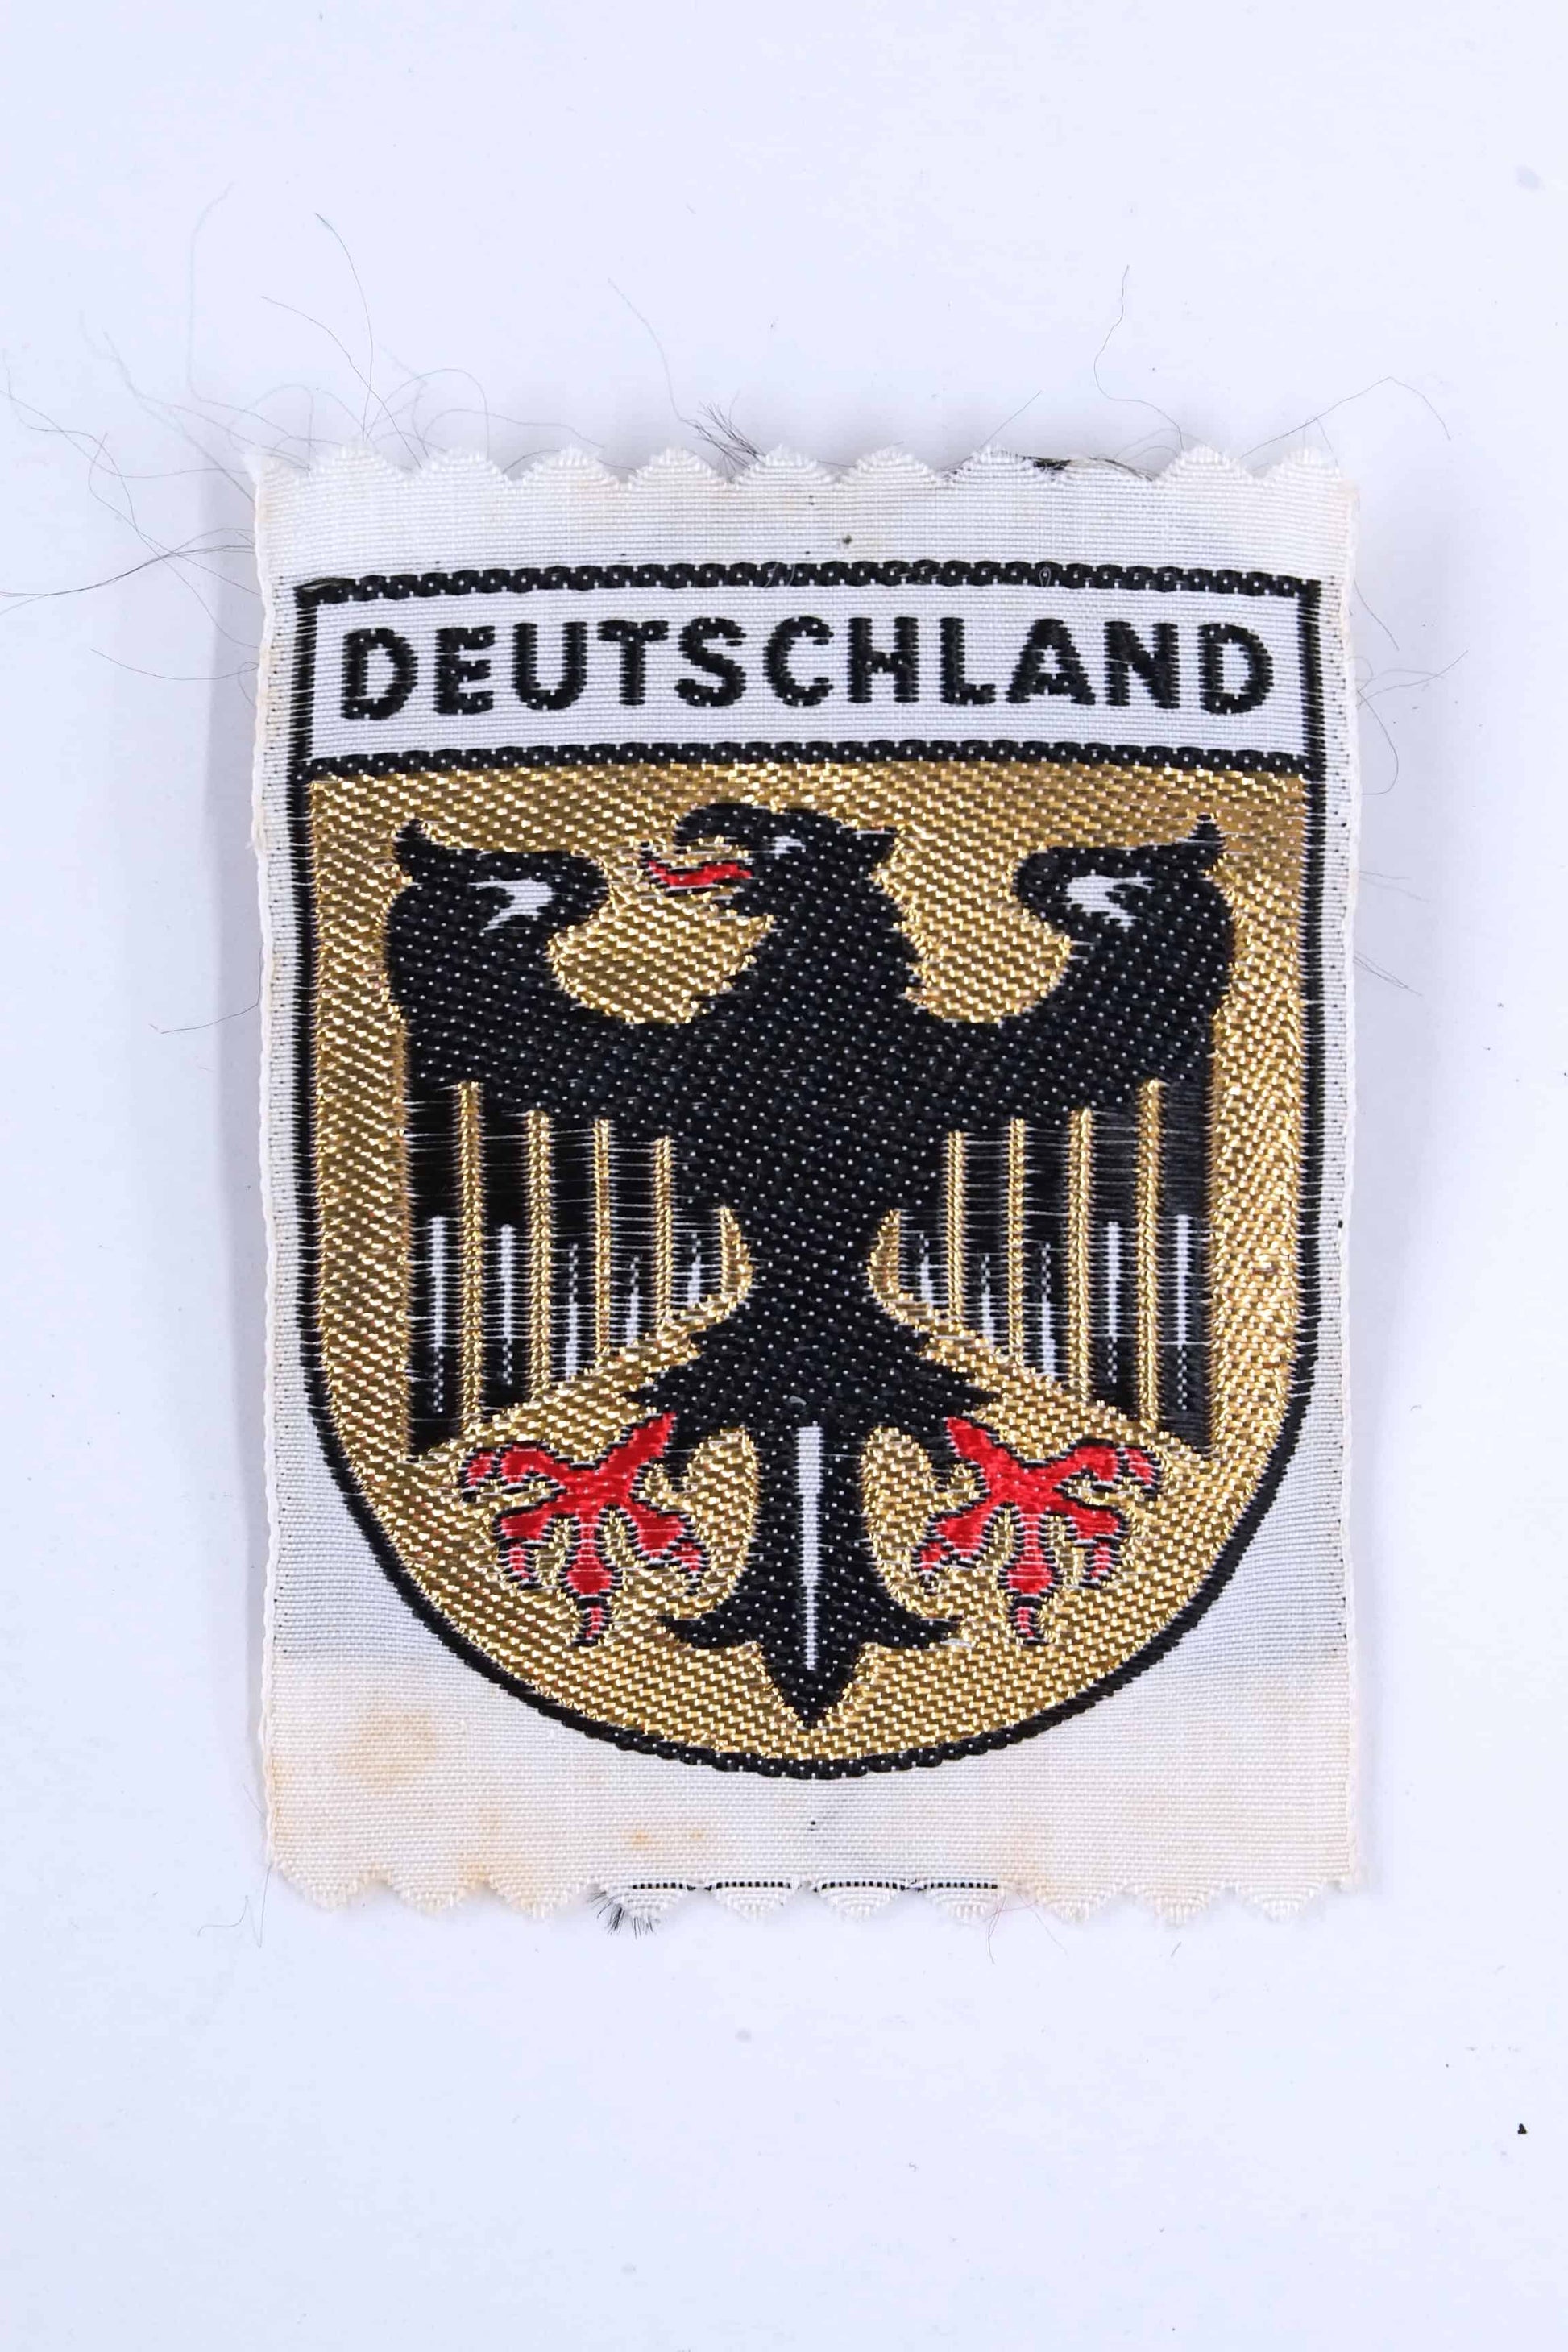 Vintage Deutschland Coat of Arms Embroidered Patch